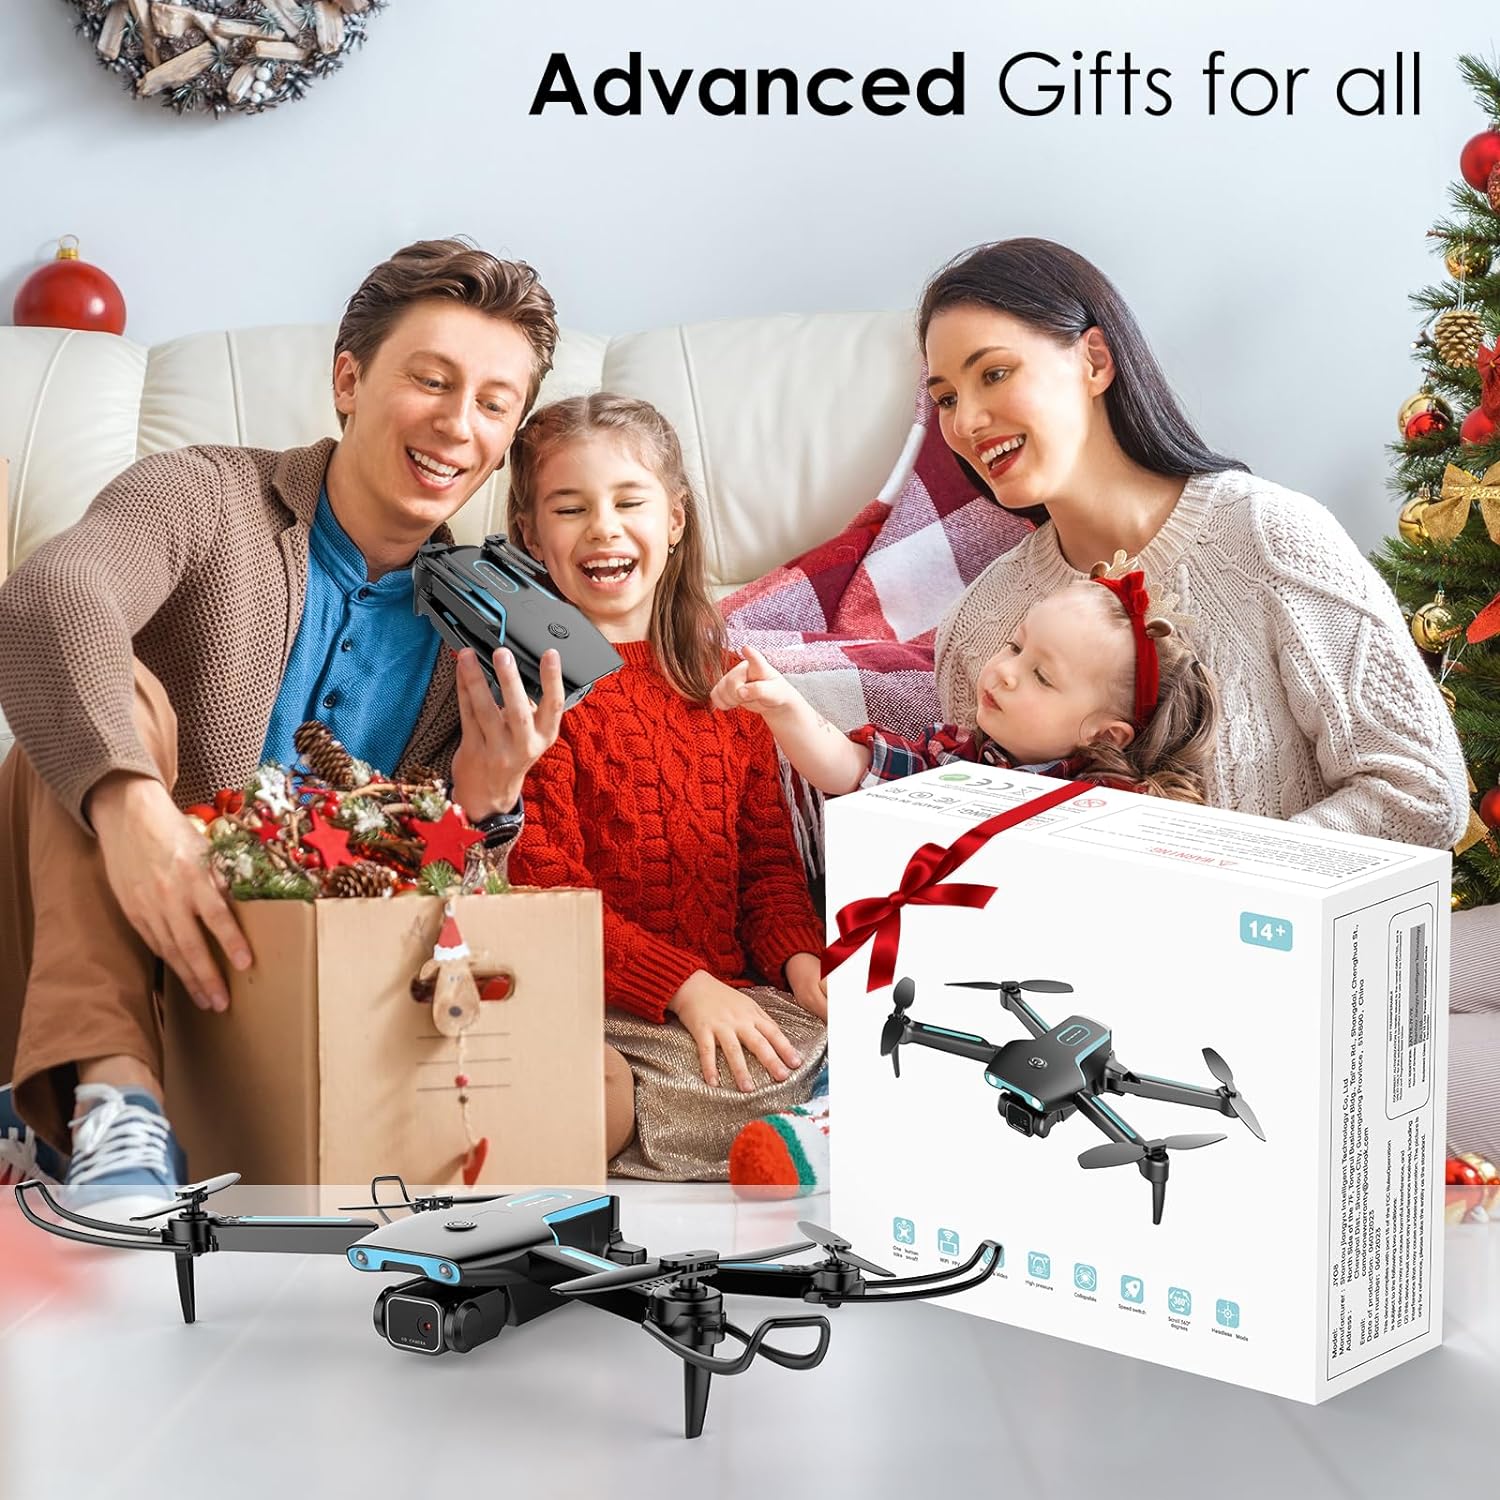 Bokigibi Drone with 1080P HD FPV Camera, RC Aircraft Quadcopter with Headless,3D Flips, One Key Start, Voice/Gravity Control, Speed Adjustment, 2 Batteries, Foldable Drone for Kids, Adults, Beginners